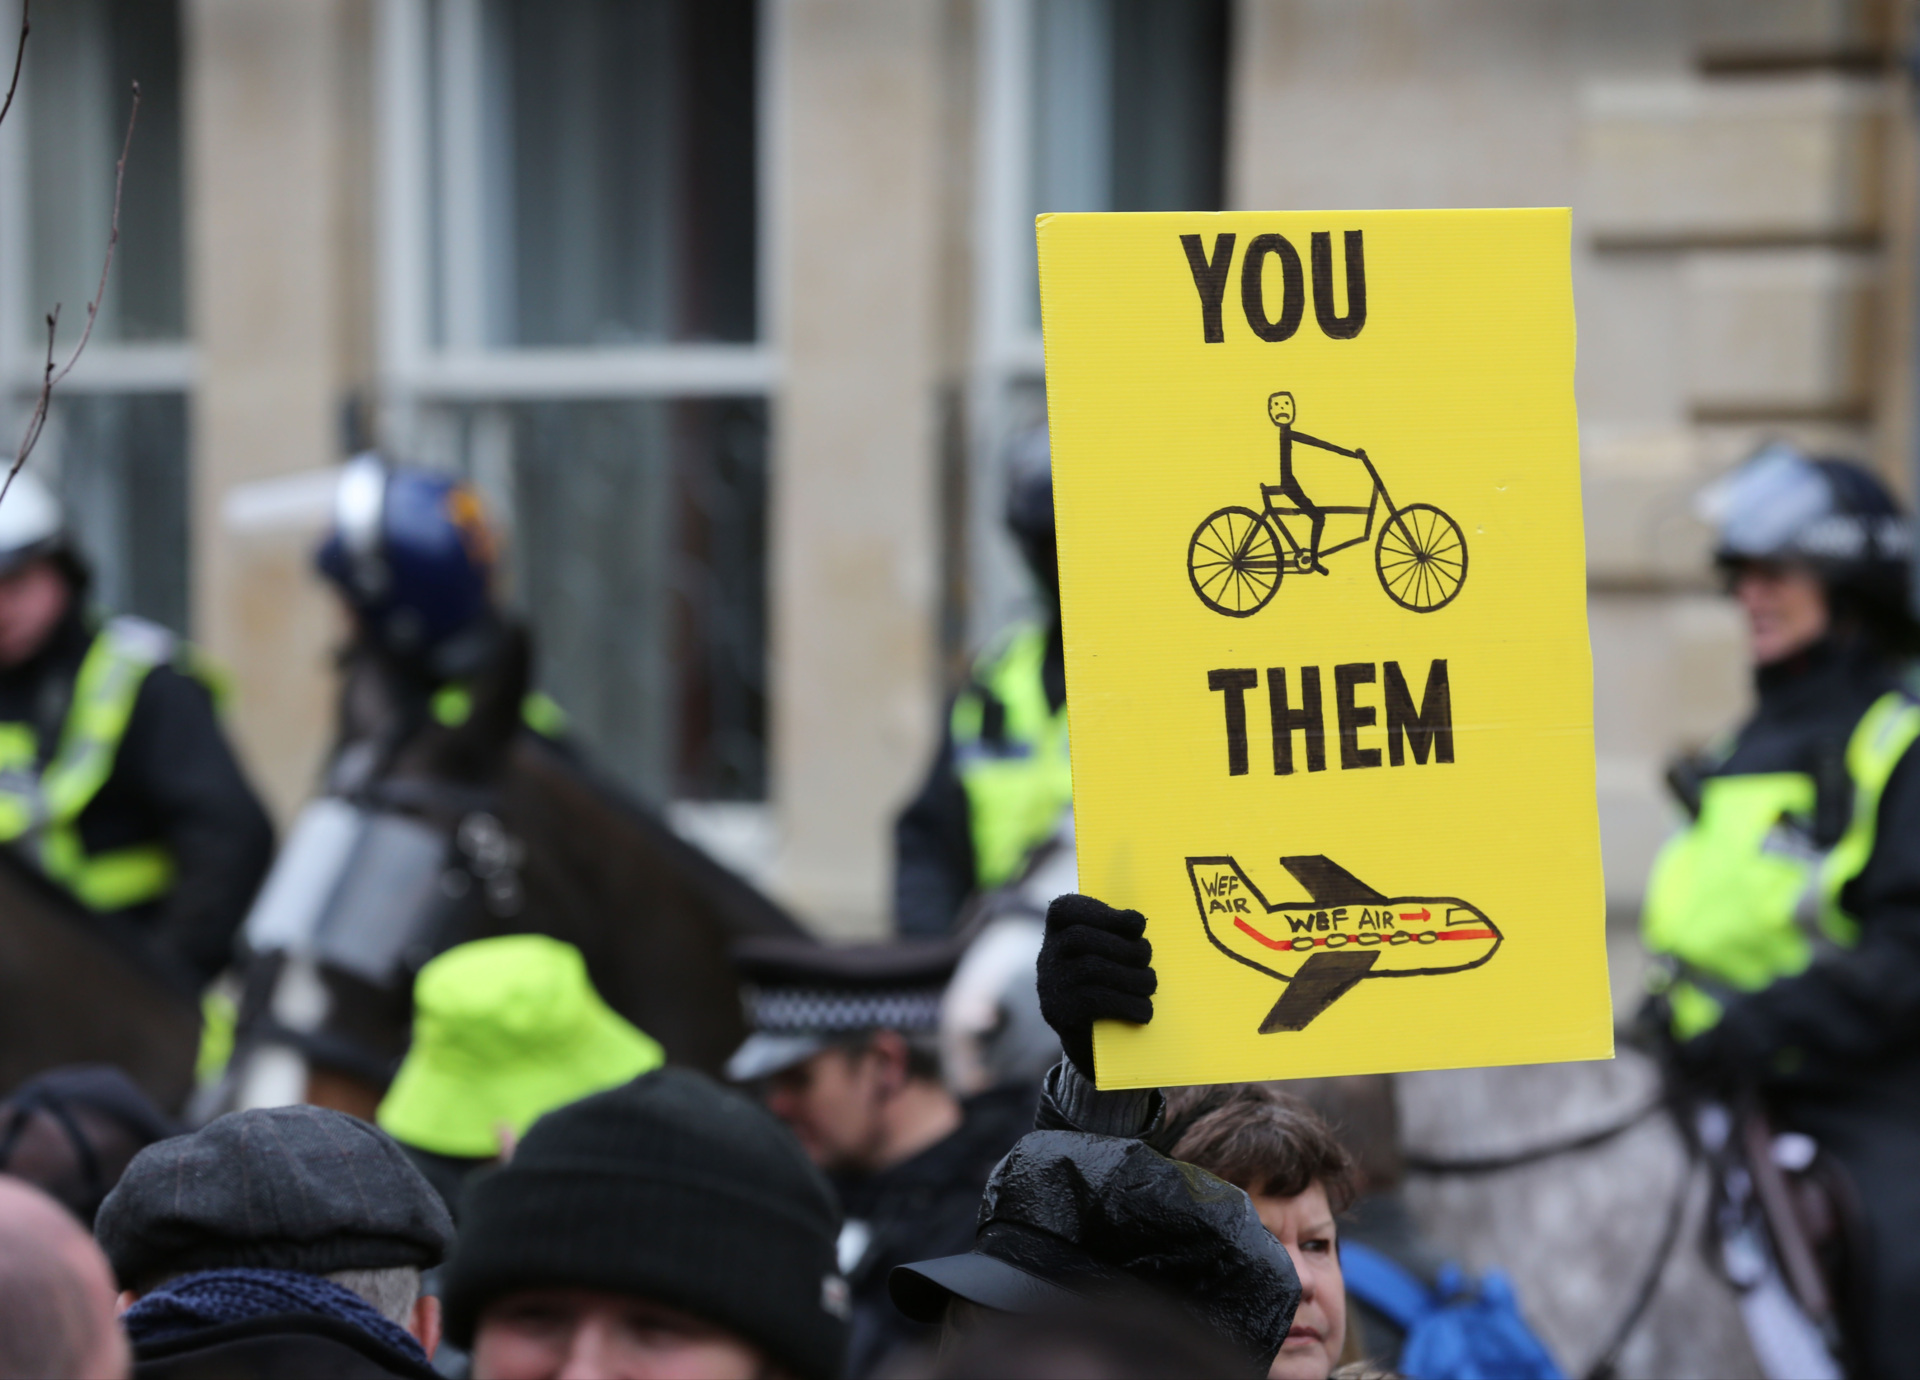 OXFORD, ENGLAND - FEBRUARY 18: A protester holds a sign criticizing the inequality of 15 minute cities as protesters gather at Broad Street on February 18, 2023 in Oxford, England.  The 15-minute cities concept suggests that all services, amenities, work and leisure are within a 15-20 minute walk or bike ride from a person's front door.  The protesters argue that the measures will turn areas into ghettos and limit their freedom of movement.  Car trips are restricted at certain times of the day and monitored with Number Plate Recognition Cameras (ANPR) and fines.  (Photo by Martin Pope/Getty Images)